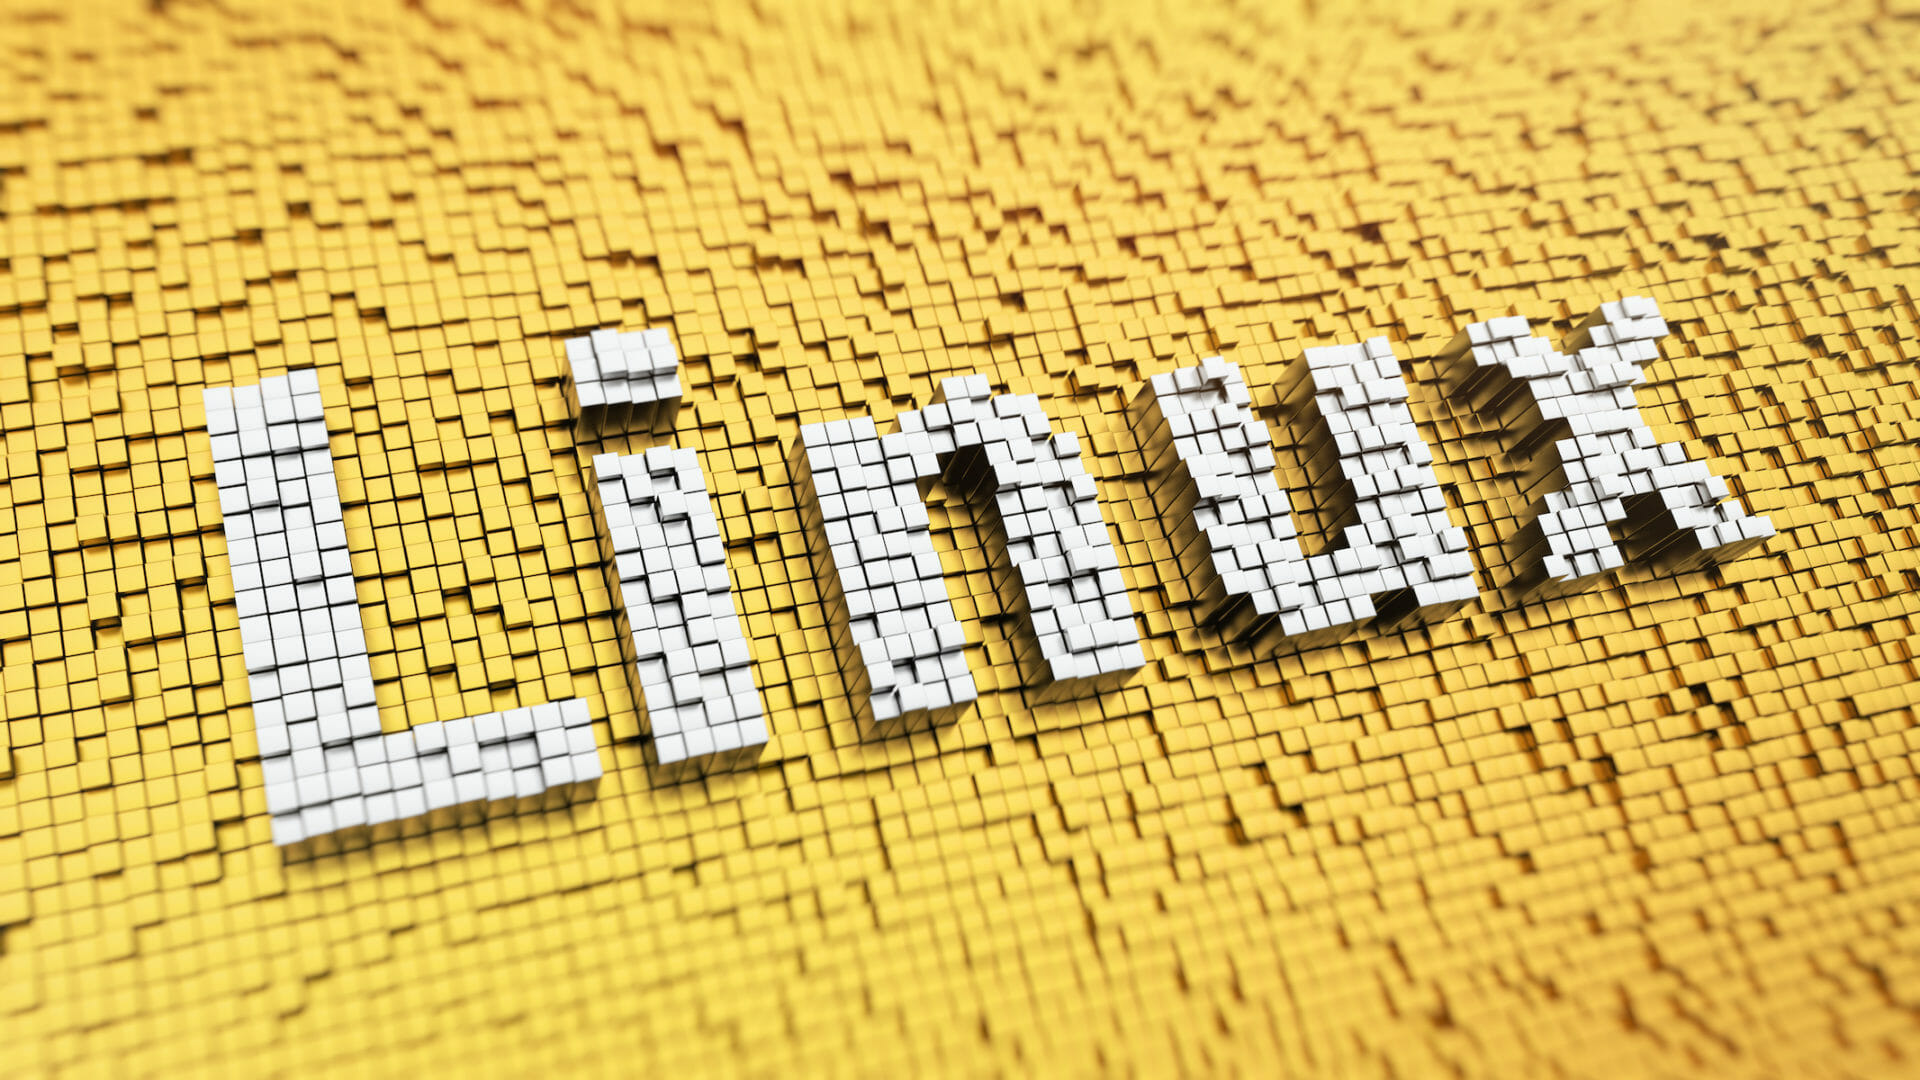 Linux from pixels